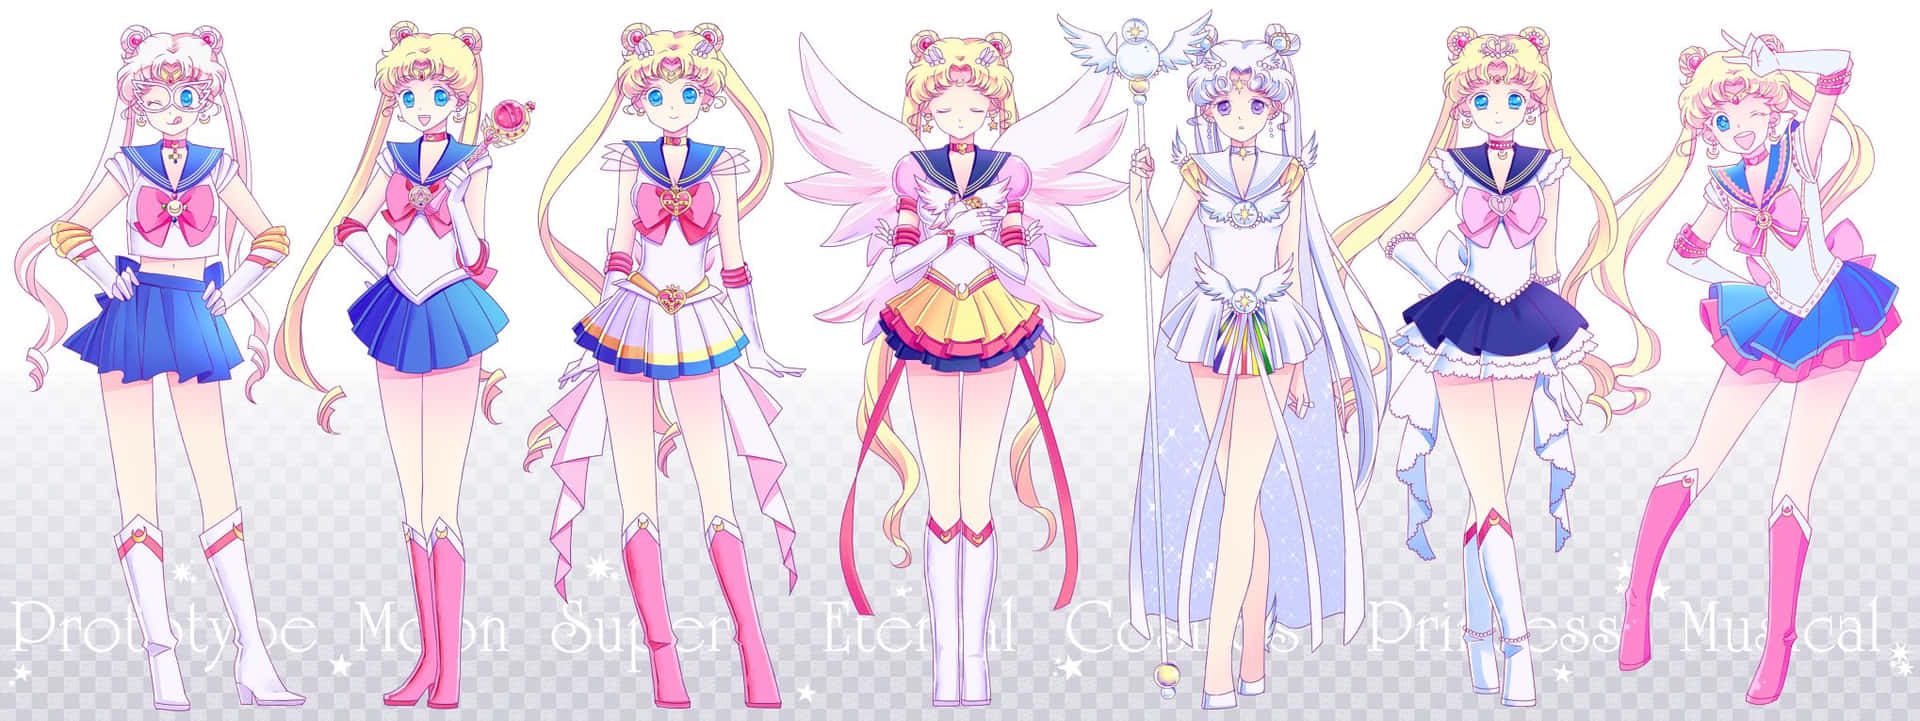 Pastel Sailor Moon Outfits Anime Pige Tapet Wallpaper